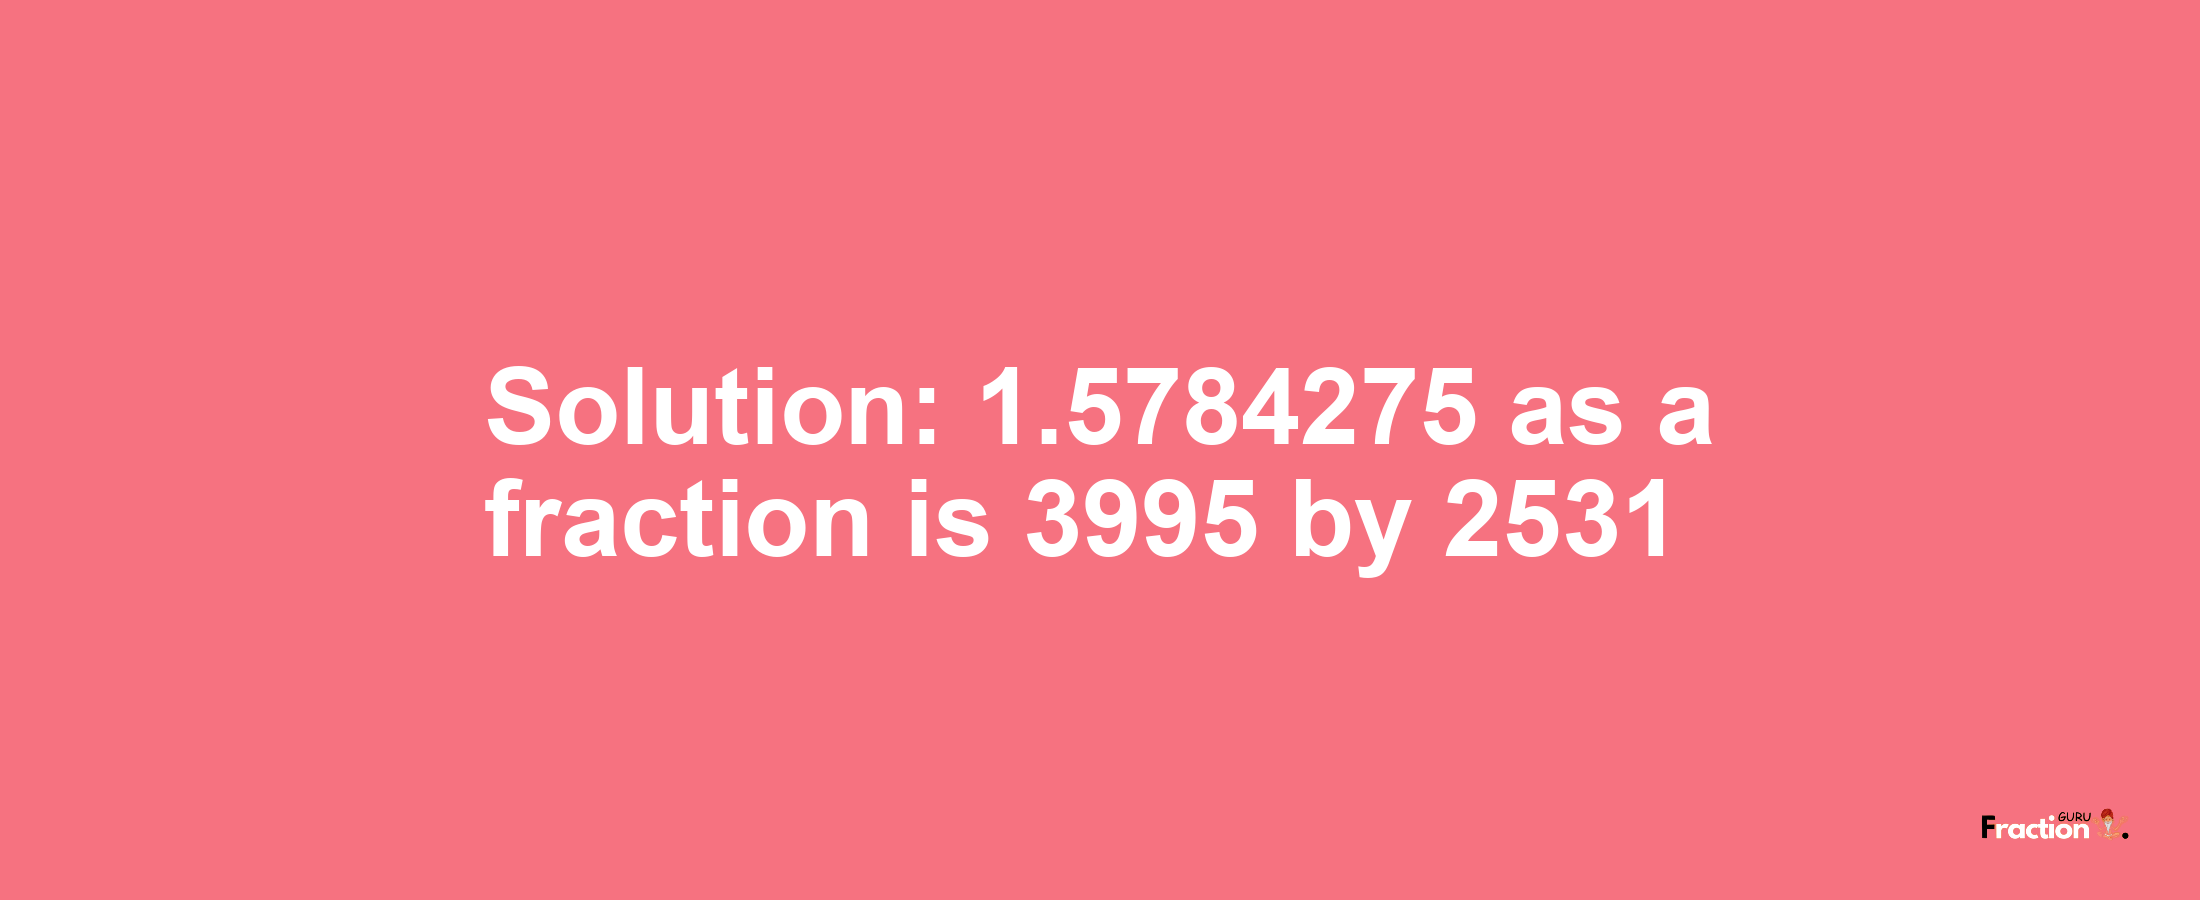 Solution:1.5784275 as a fraction is 3995/2531